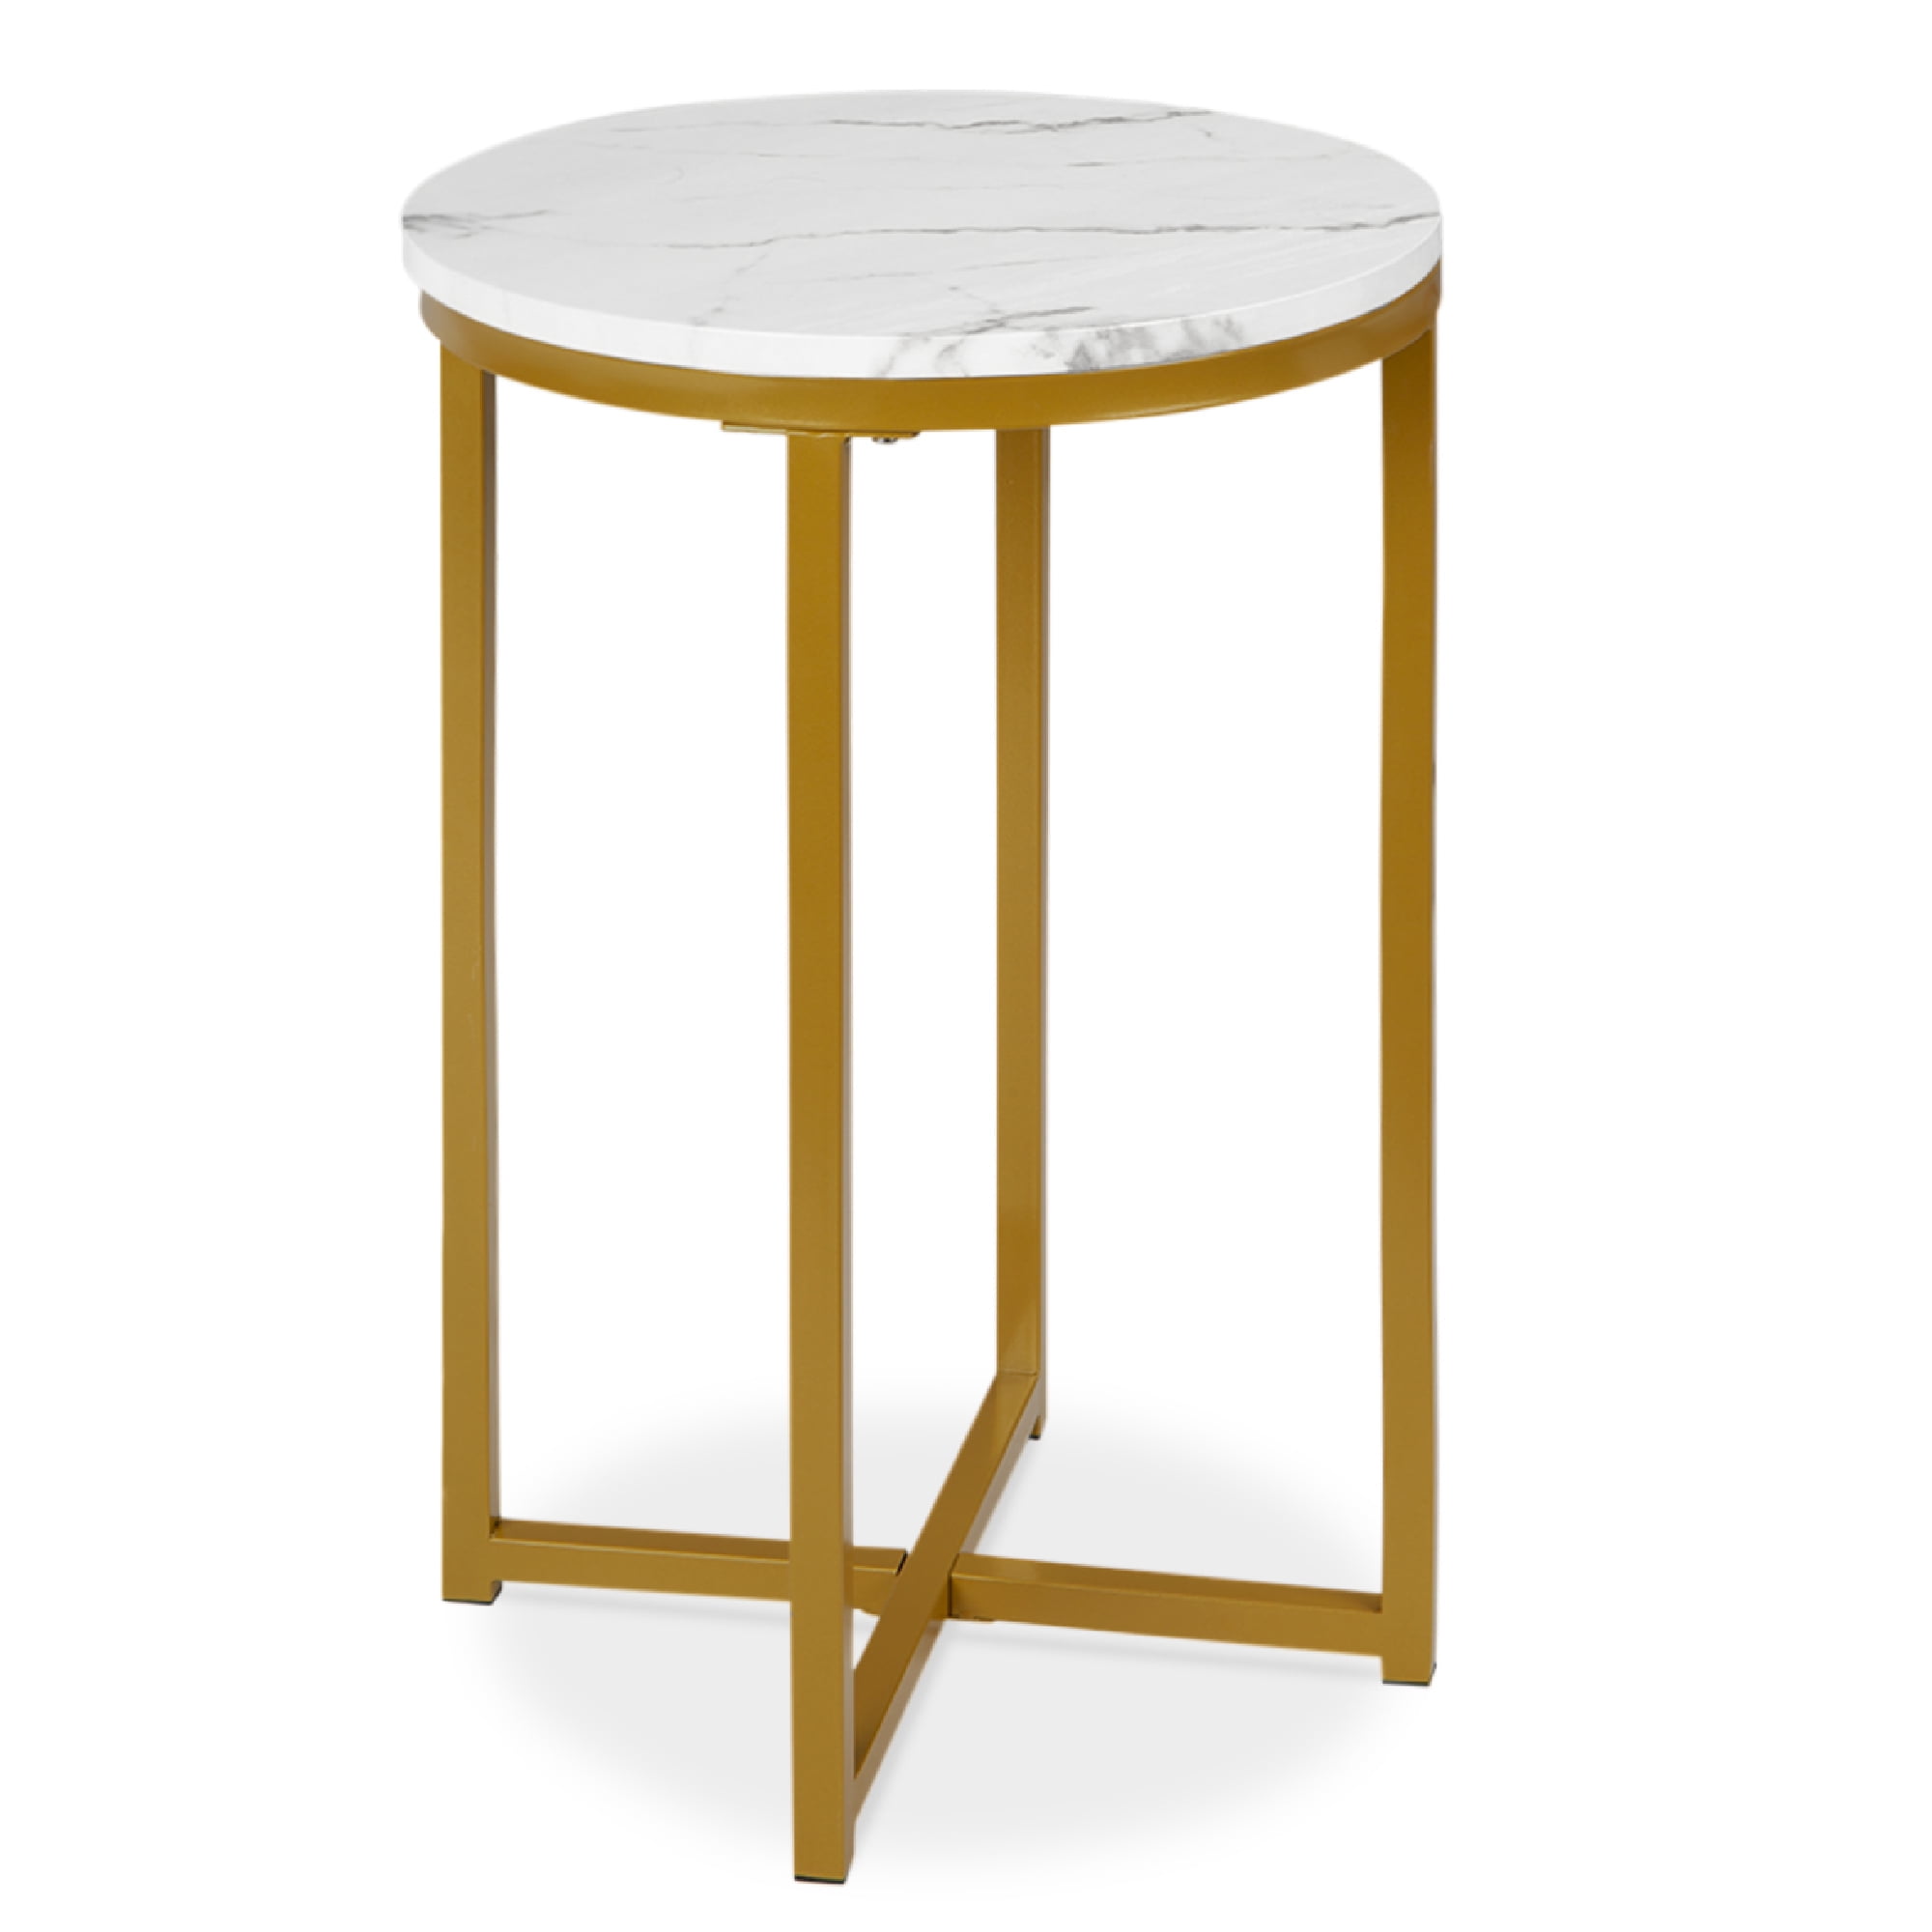 Living Room Accent Side Table, Round Side Table White Top